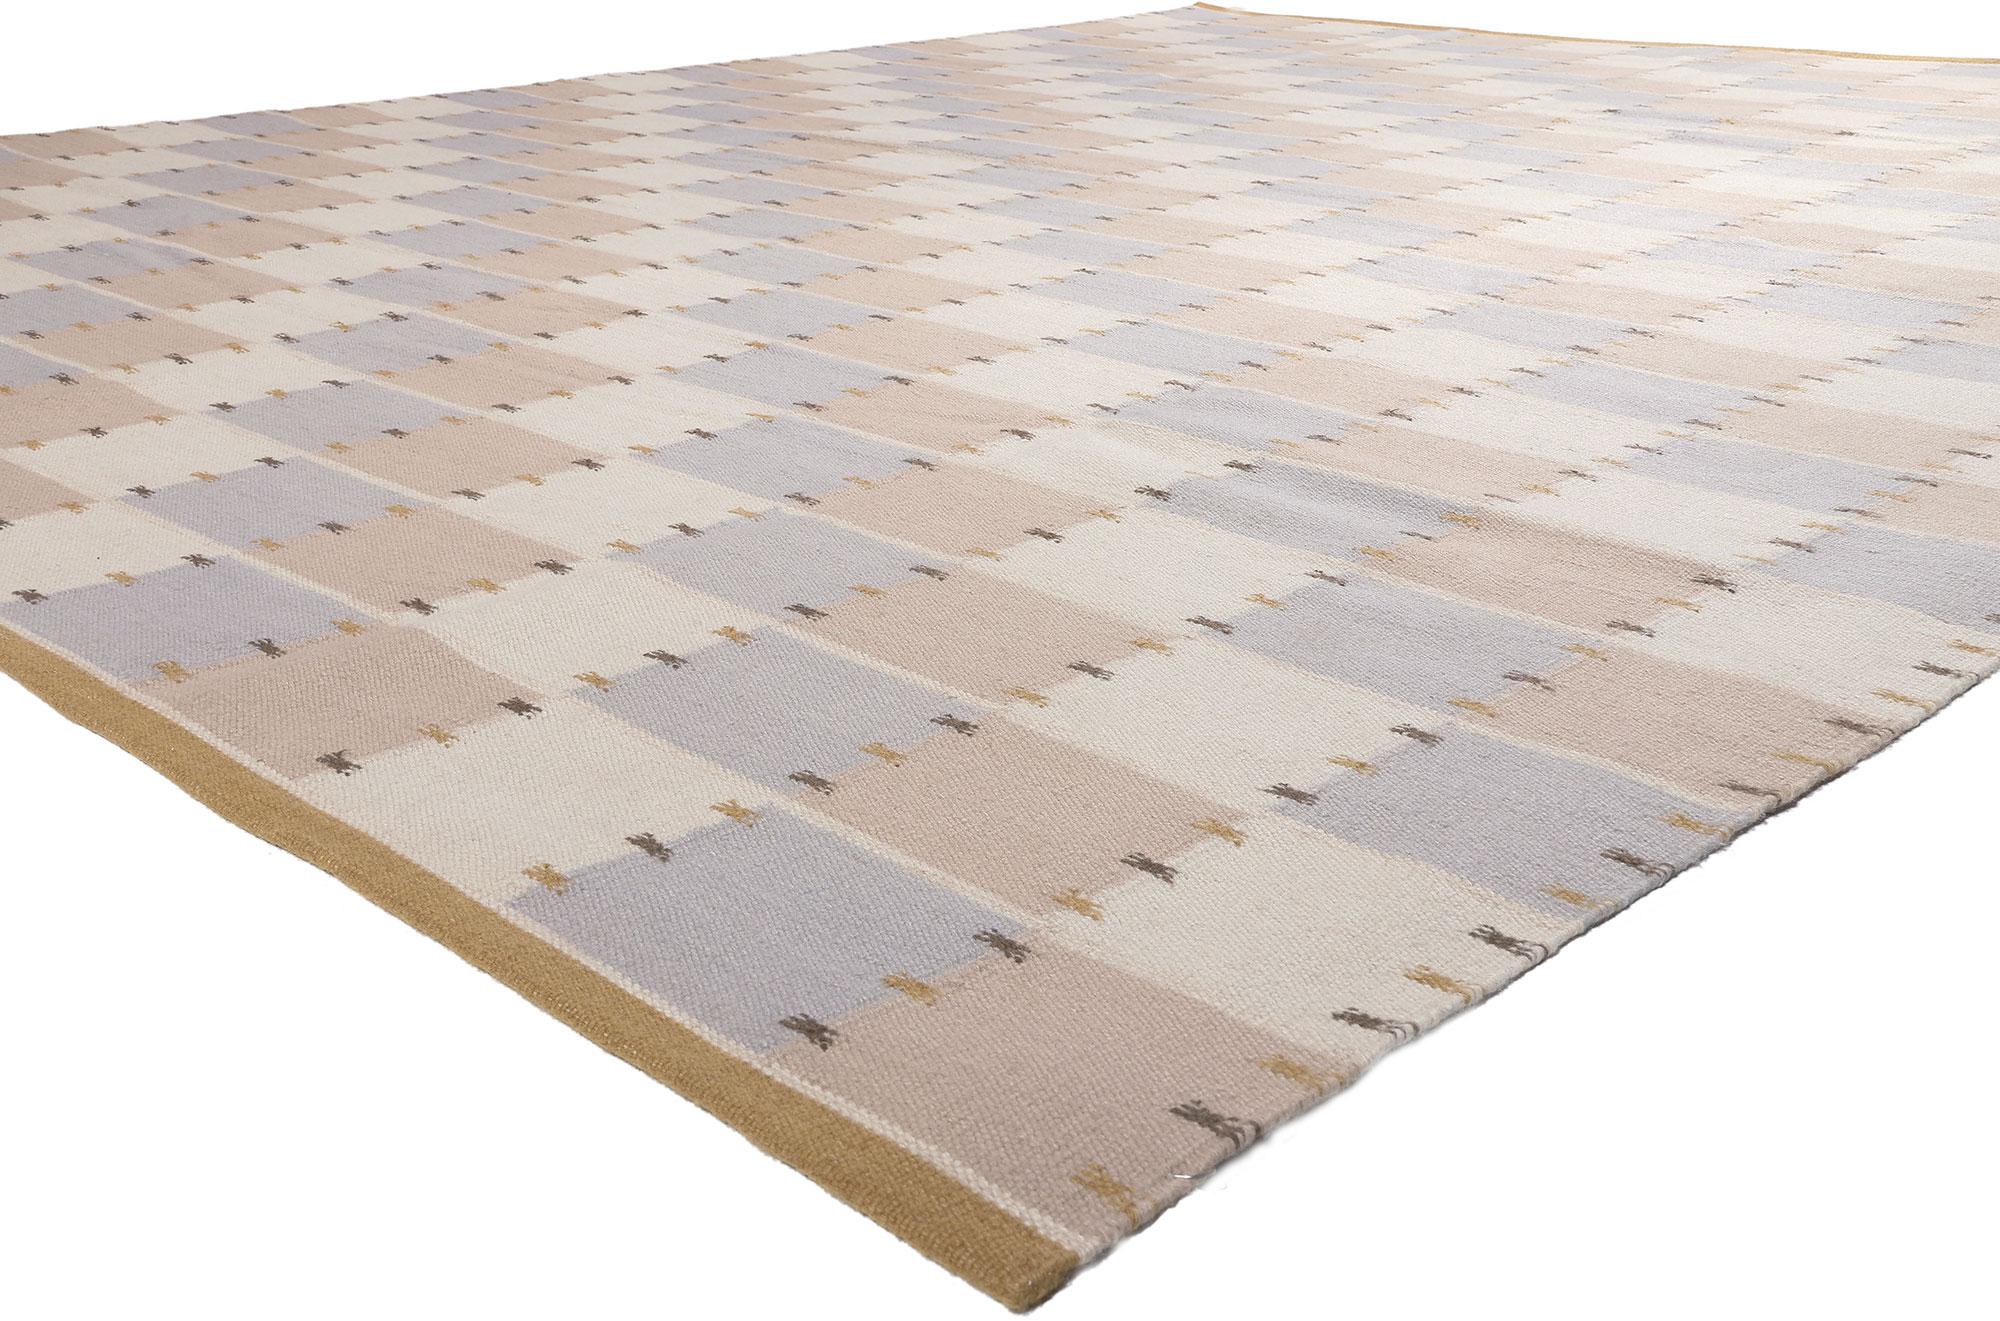 30951 New Swedish Inspired Kilim Rug, 12'01 x 15'01.
​Scandinavian Modern meets Minimalist Cubism in this handwoven wool Swedish-inspired kilim rug. The simplistic linear design and minimal color scheme woven into this piece share a common theme of